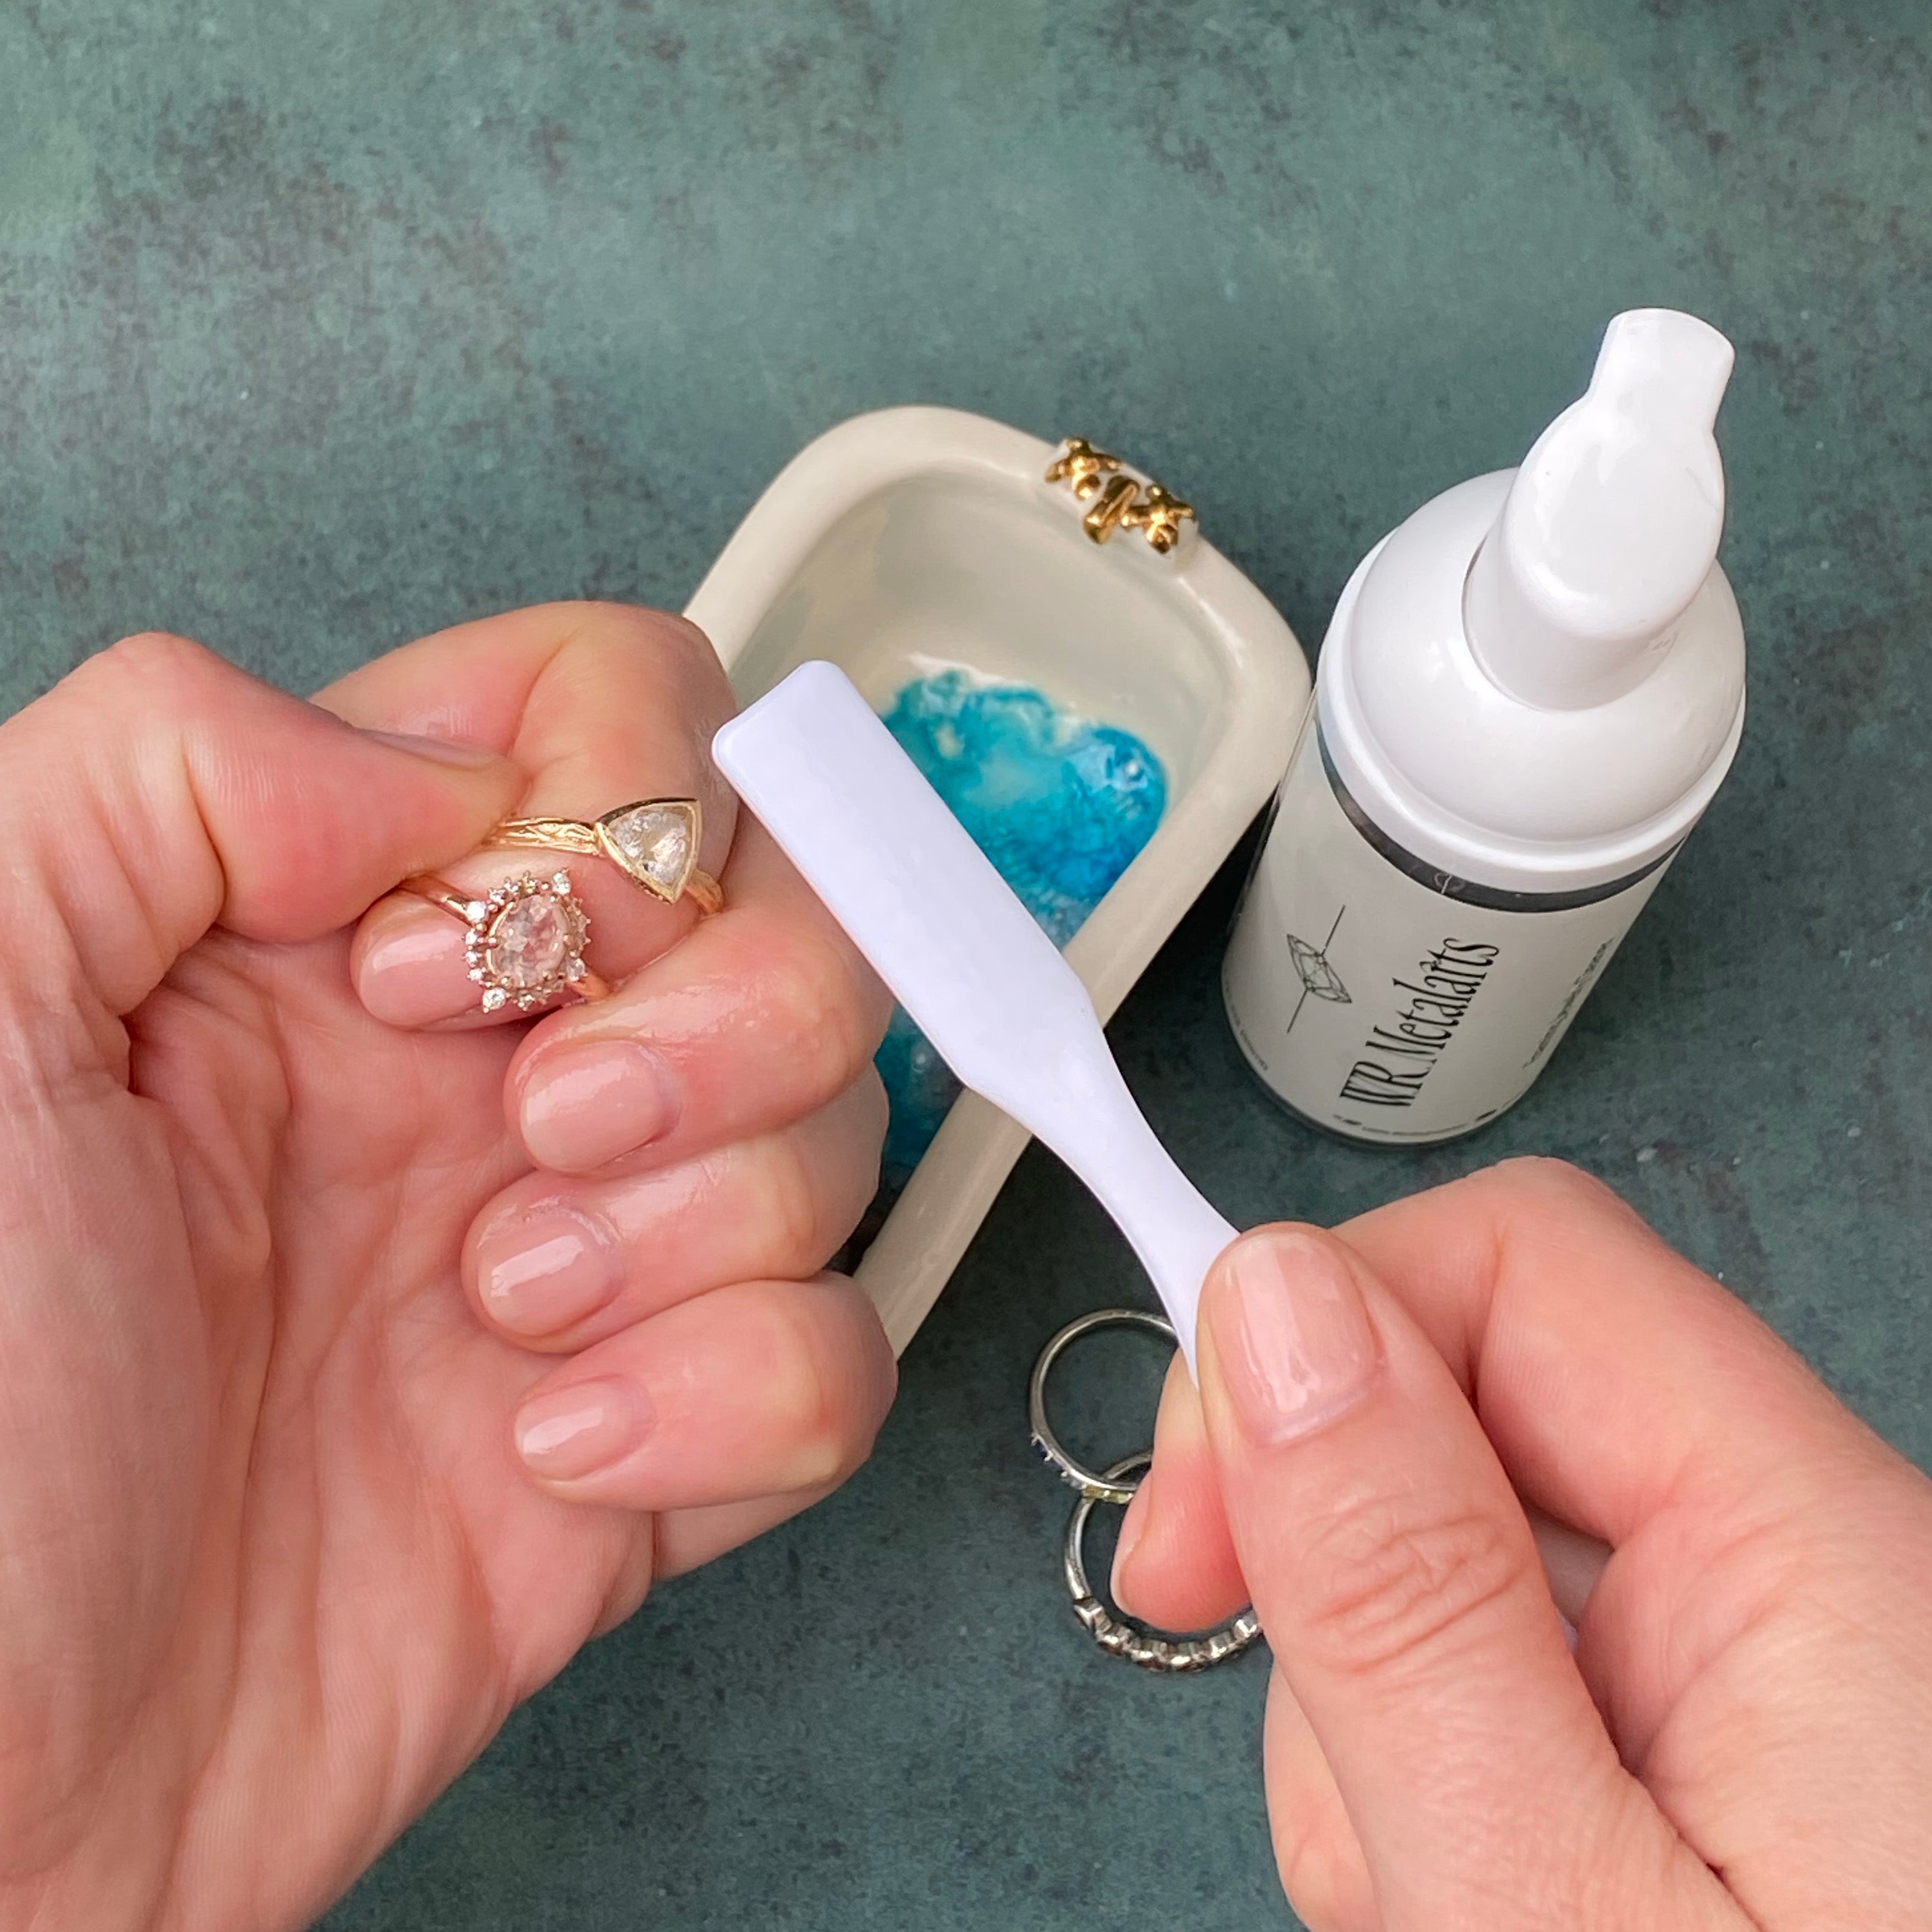 Hands using soft white brush to clean several rings with W.R. Metalarts Jewelry Cleaner